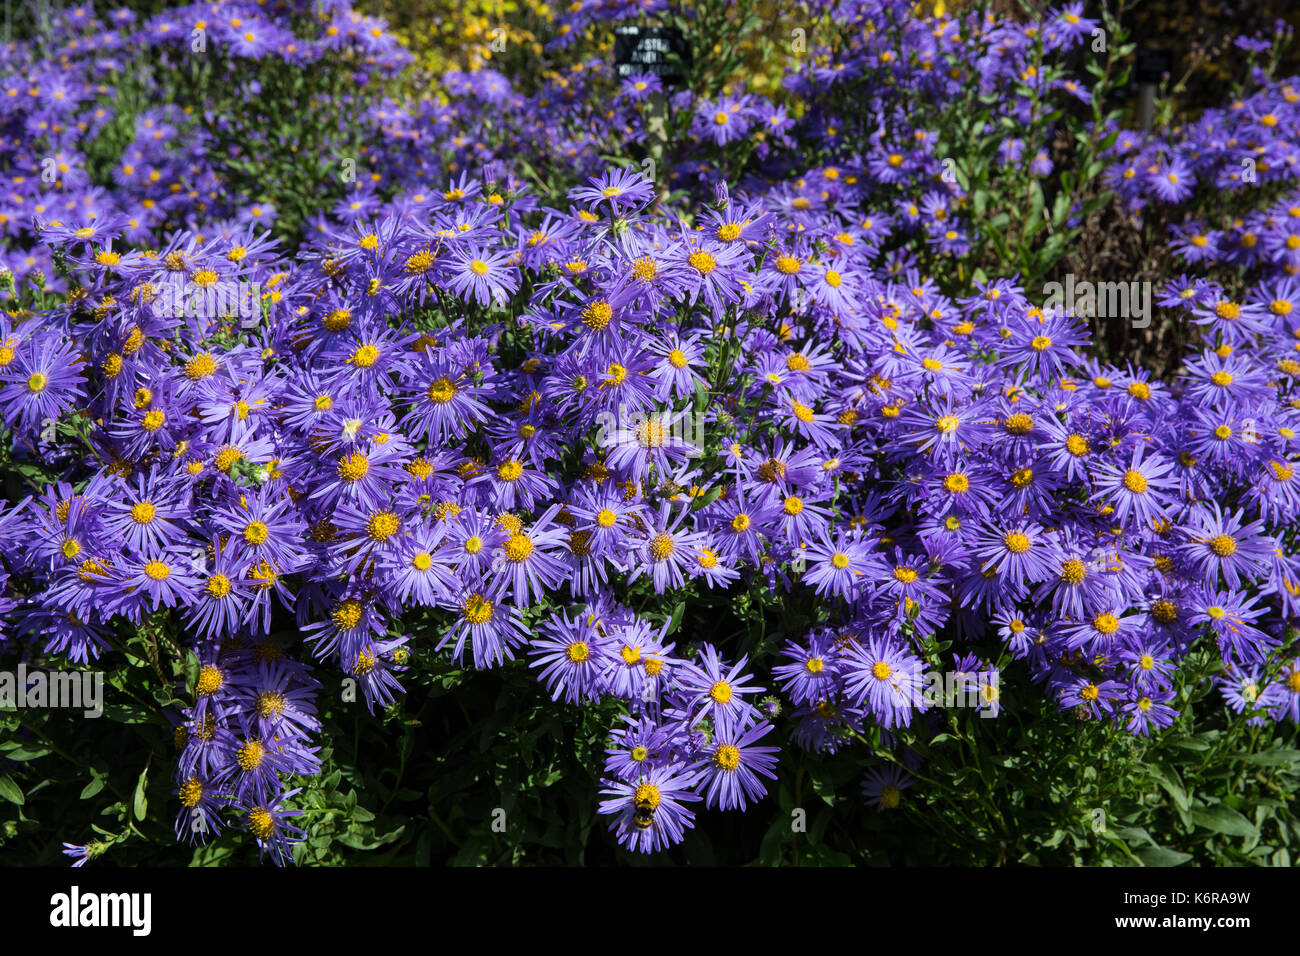 Egham, UK. 13th Sep, 2017. Aster Amellus 'King George' in a herbaceous border at the Savill Garden. Created in the 1930s, the 35-acre Savill Garden contains a series of interconnected gardens and woodland including the Hidden Gardens, Spring Wood, the Summer Gardens, the New Zealand Garden, Summer Wood, The Glades, Autumn Wood and the Winter Beds. Credit: Mark Kerrison/Alamy Live News Stock Photo